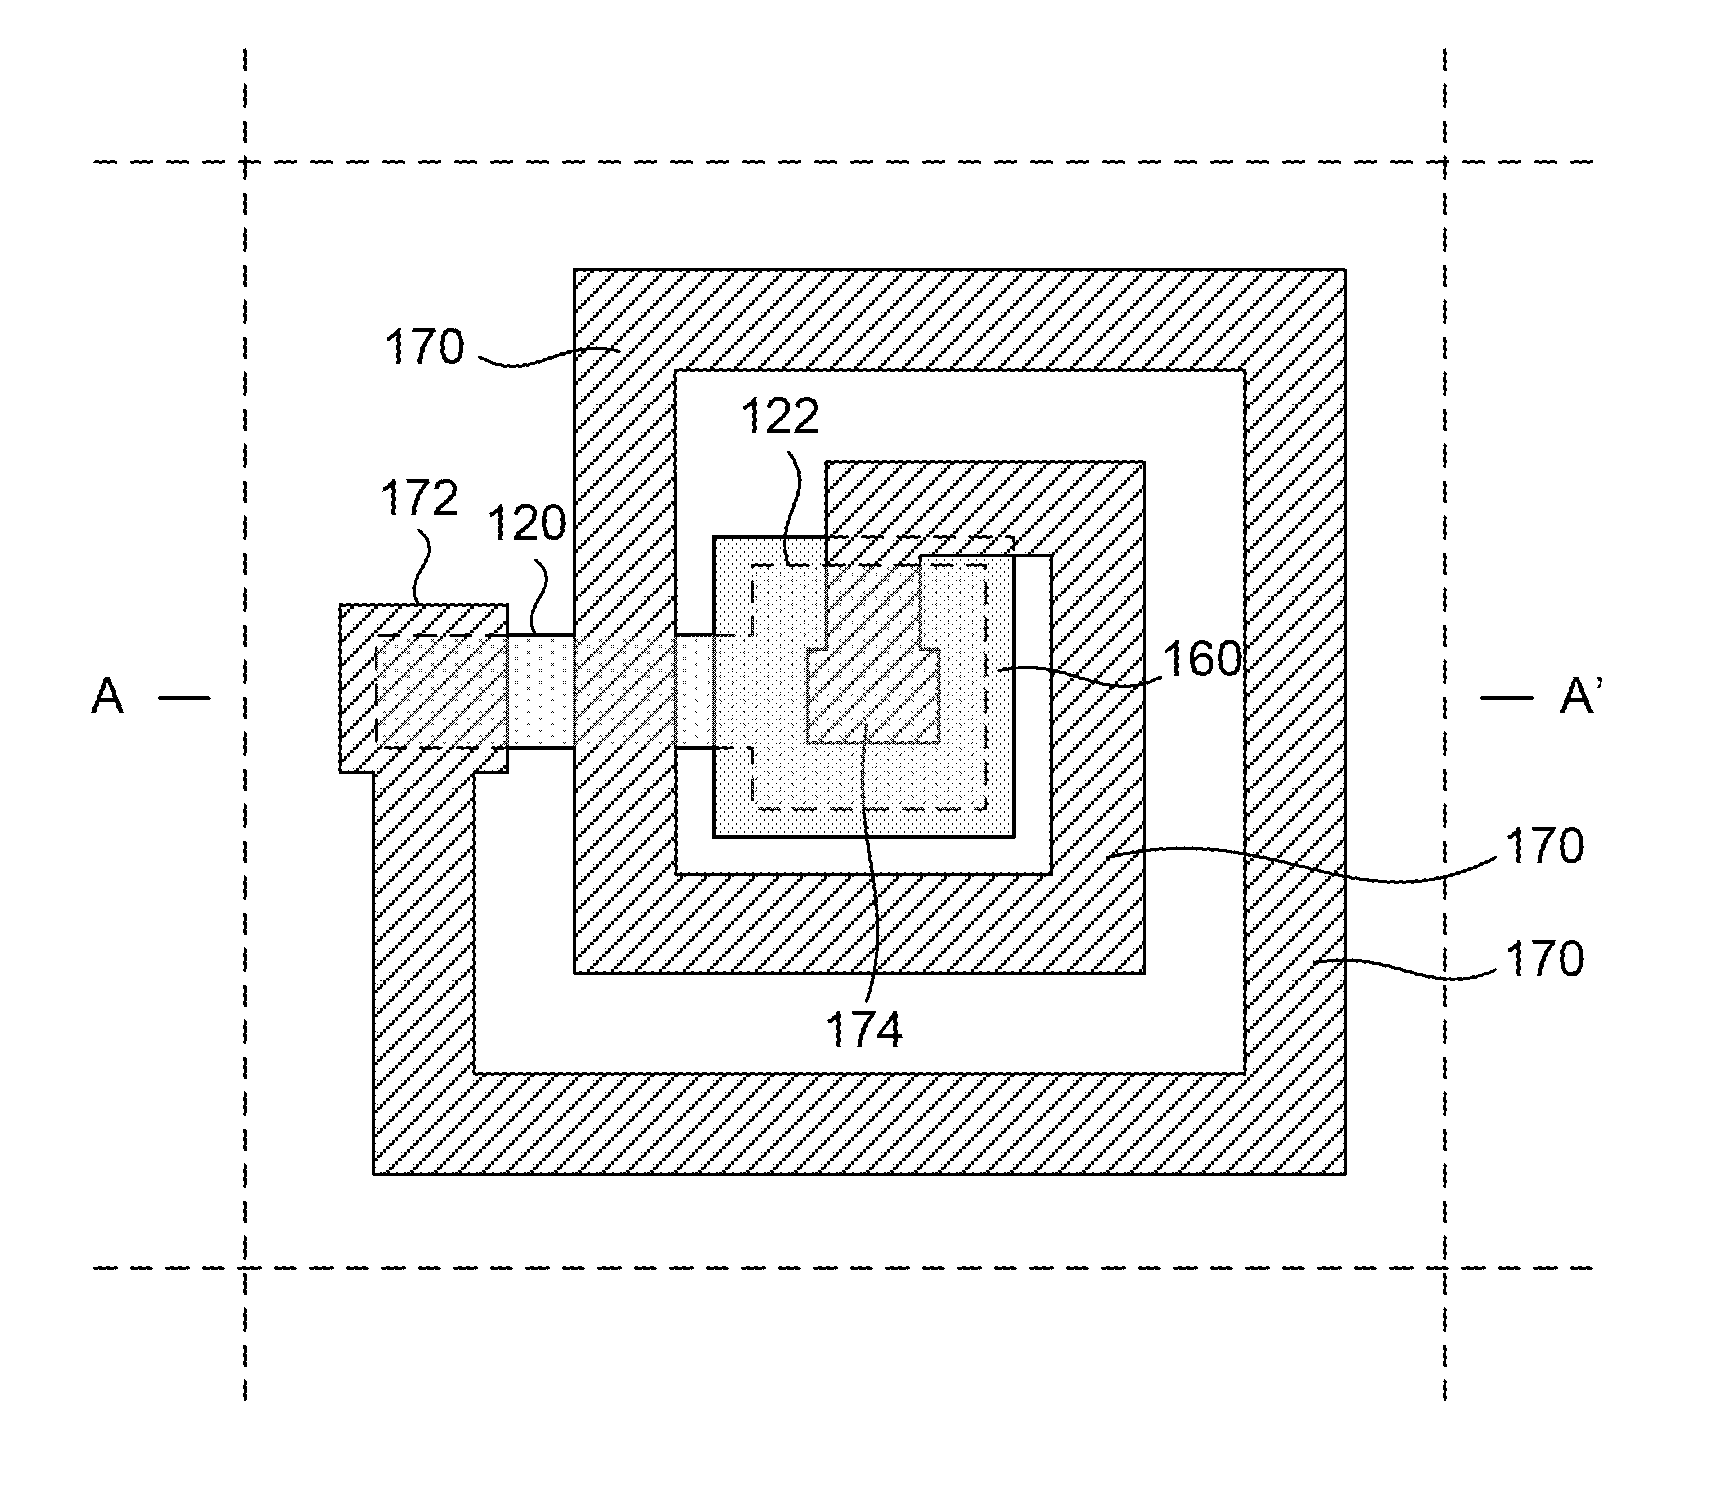 Surveillance devices with multiple capacitors